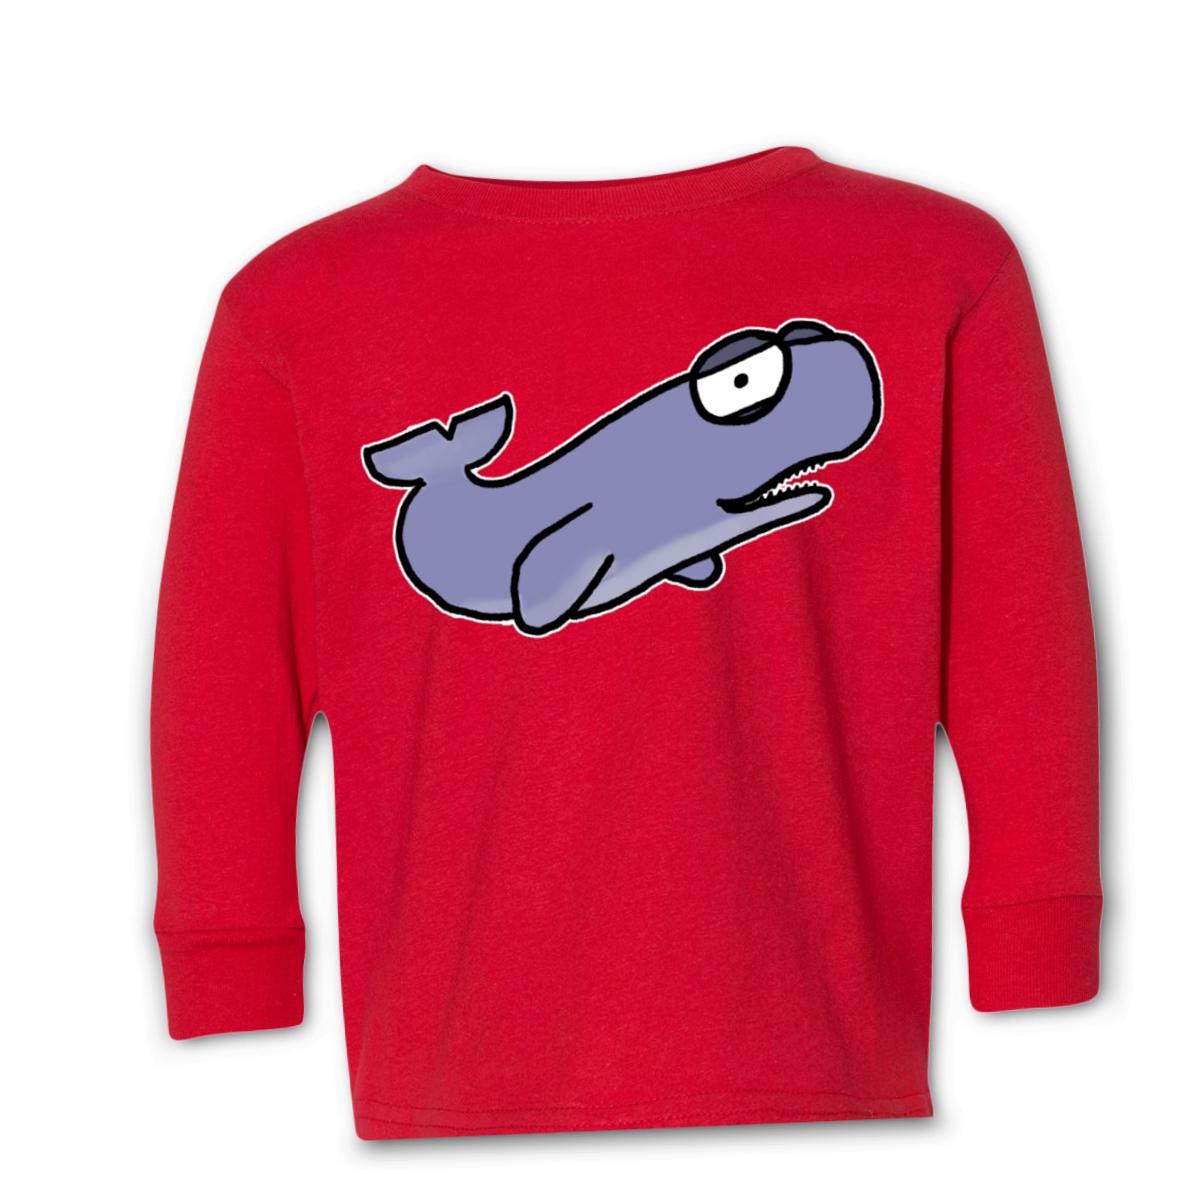 Sperm Whale Kid's Long Sleeve Tee Large red